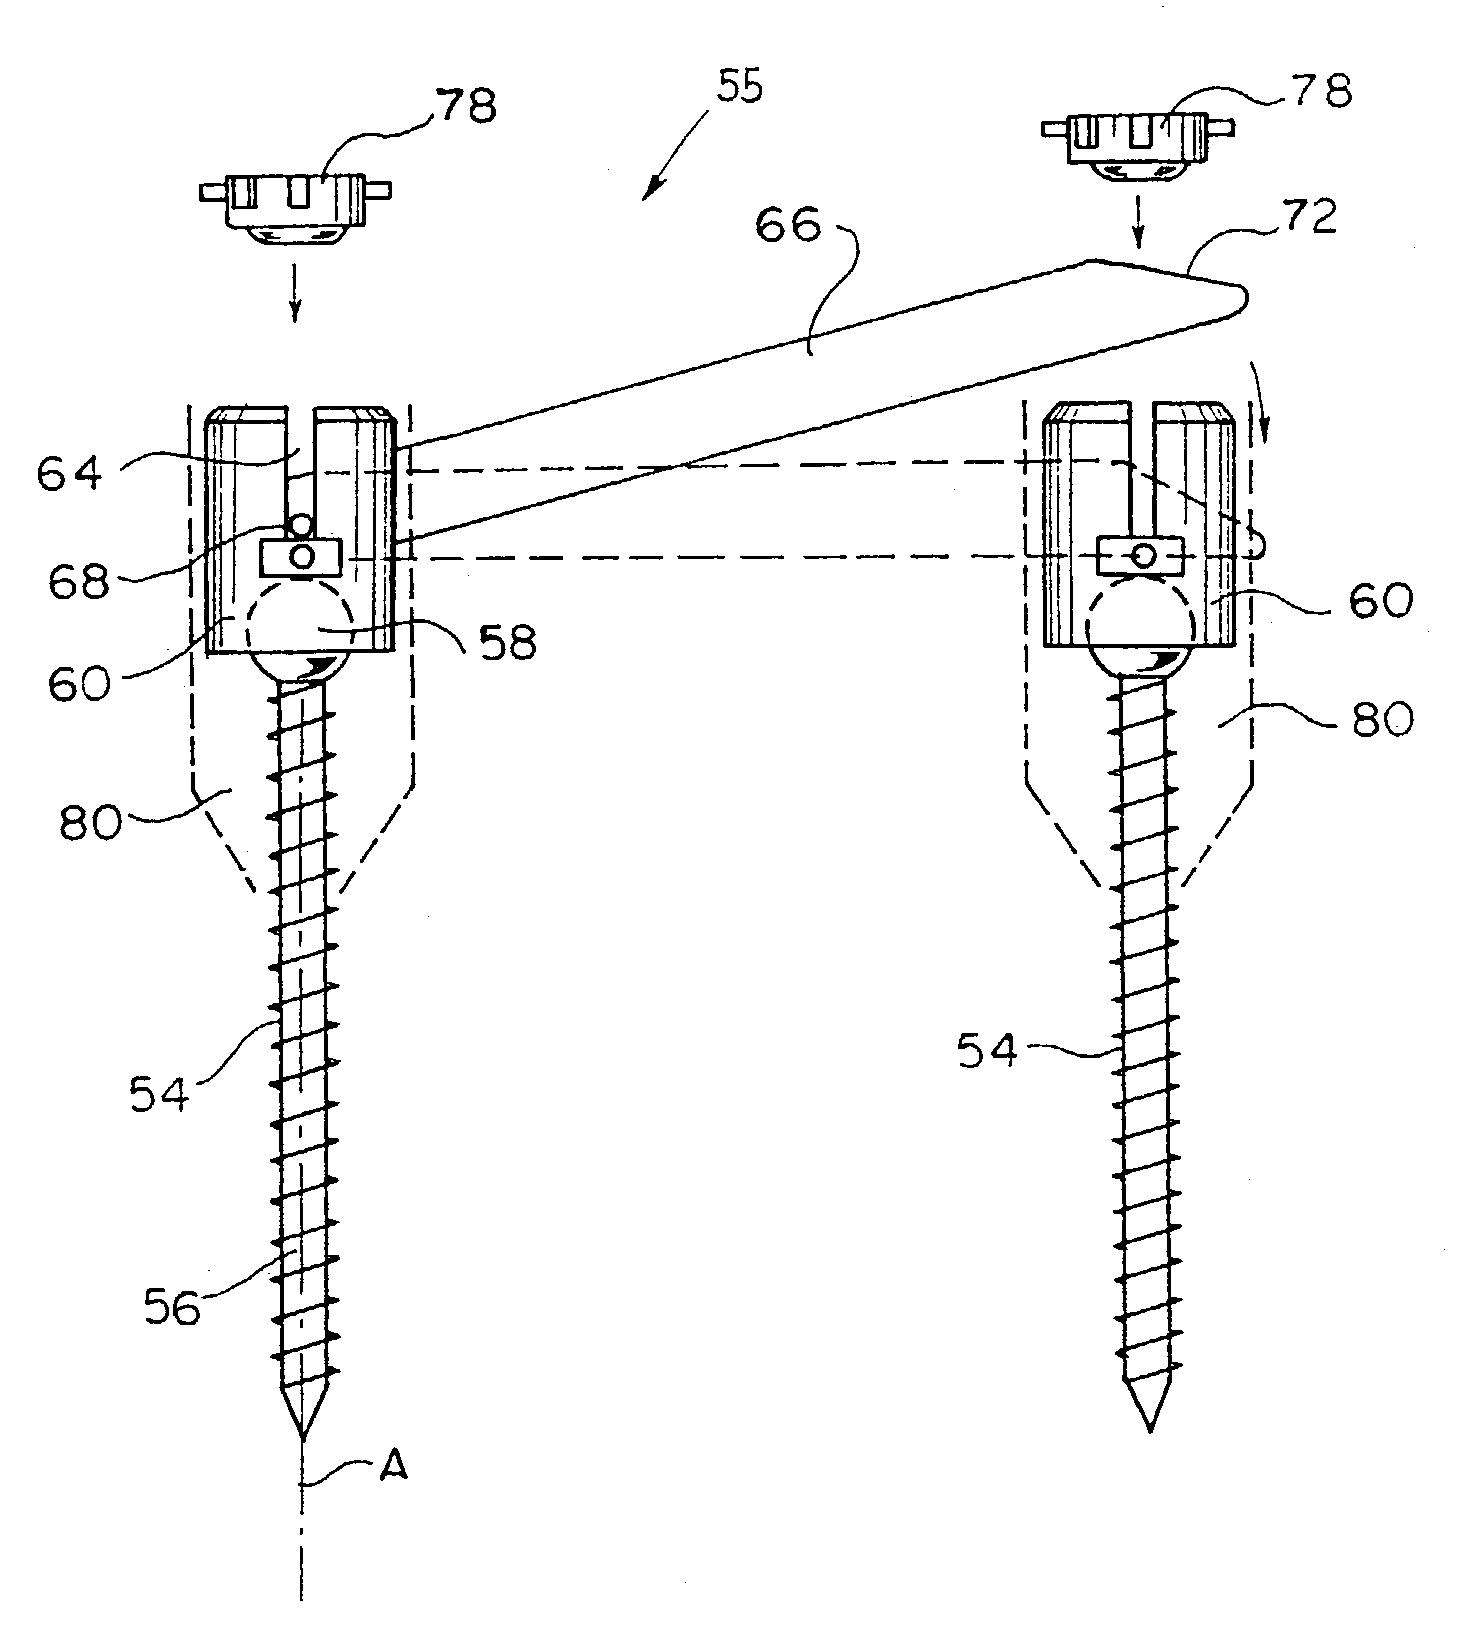 Device and method for percutaneous placement of lumbar pedicle screws and connecting rods